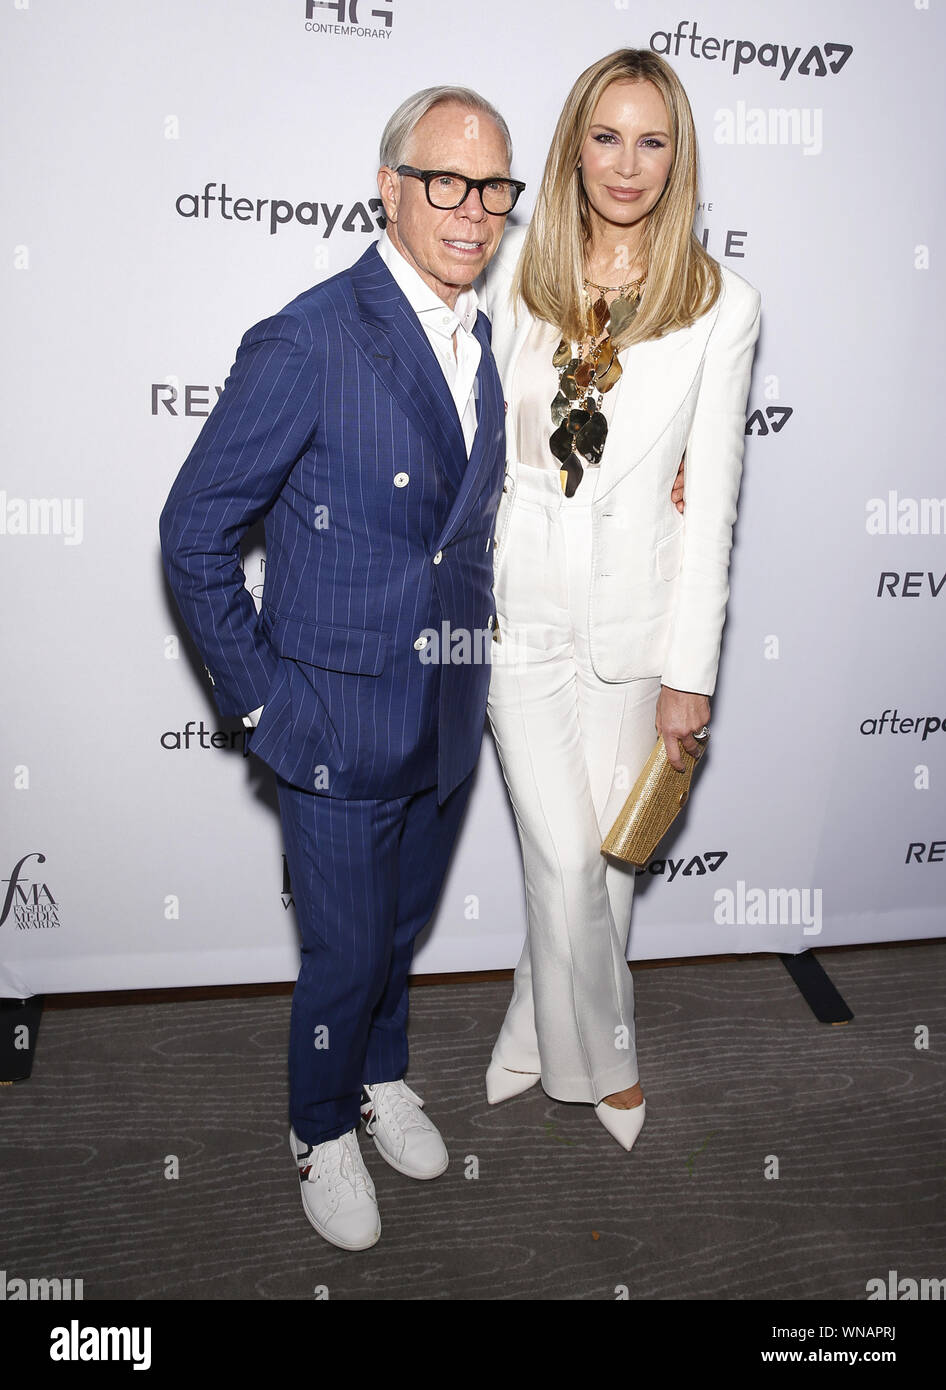 sikkerhed stribet Fancy NEW YORK, NY - September 05, 2019: Tommy Hilfiger and Dee Ocleppo attend  The Daily Front Row's 7th annual Fashion Media Awards at The Rainbow Room  Stock Photo - Alamy